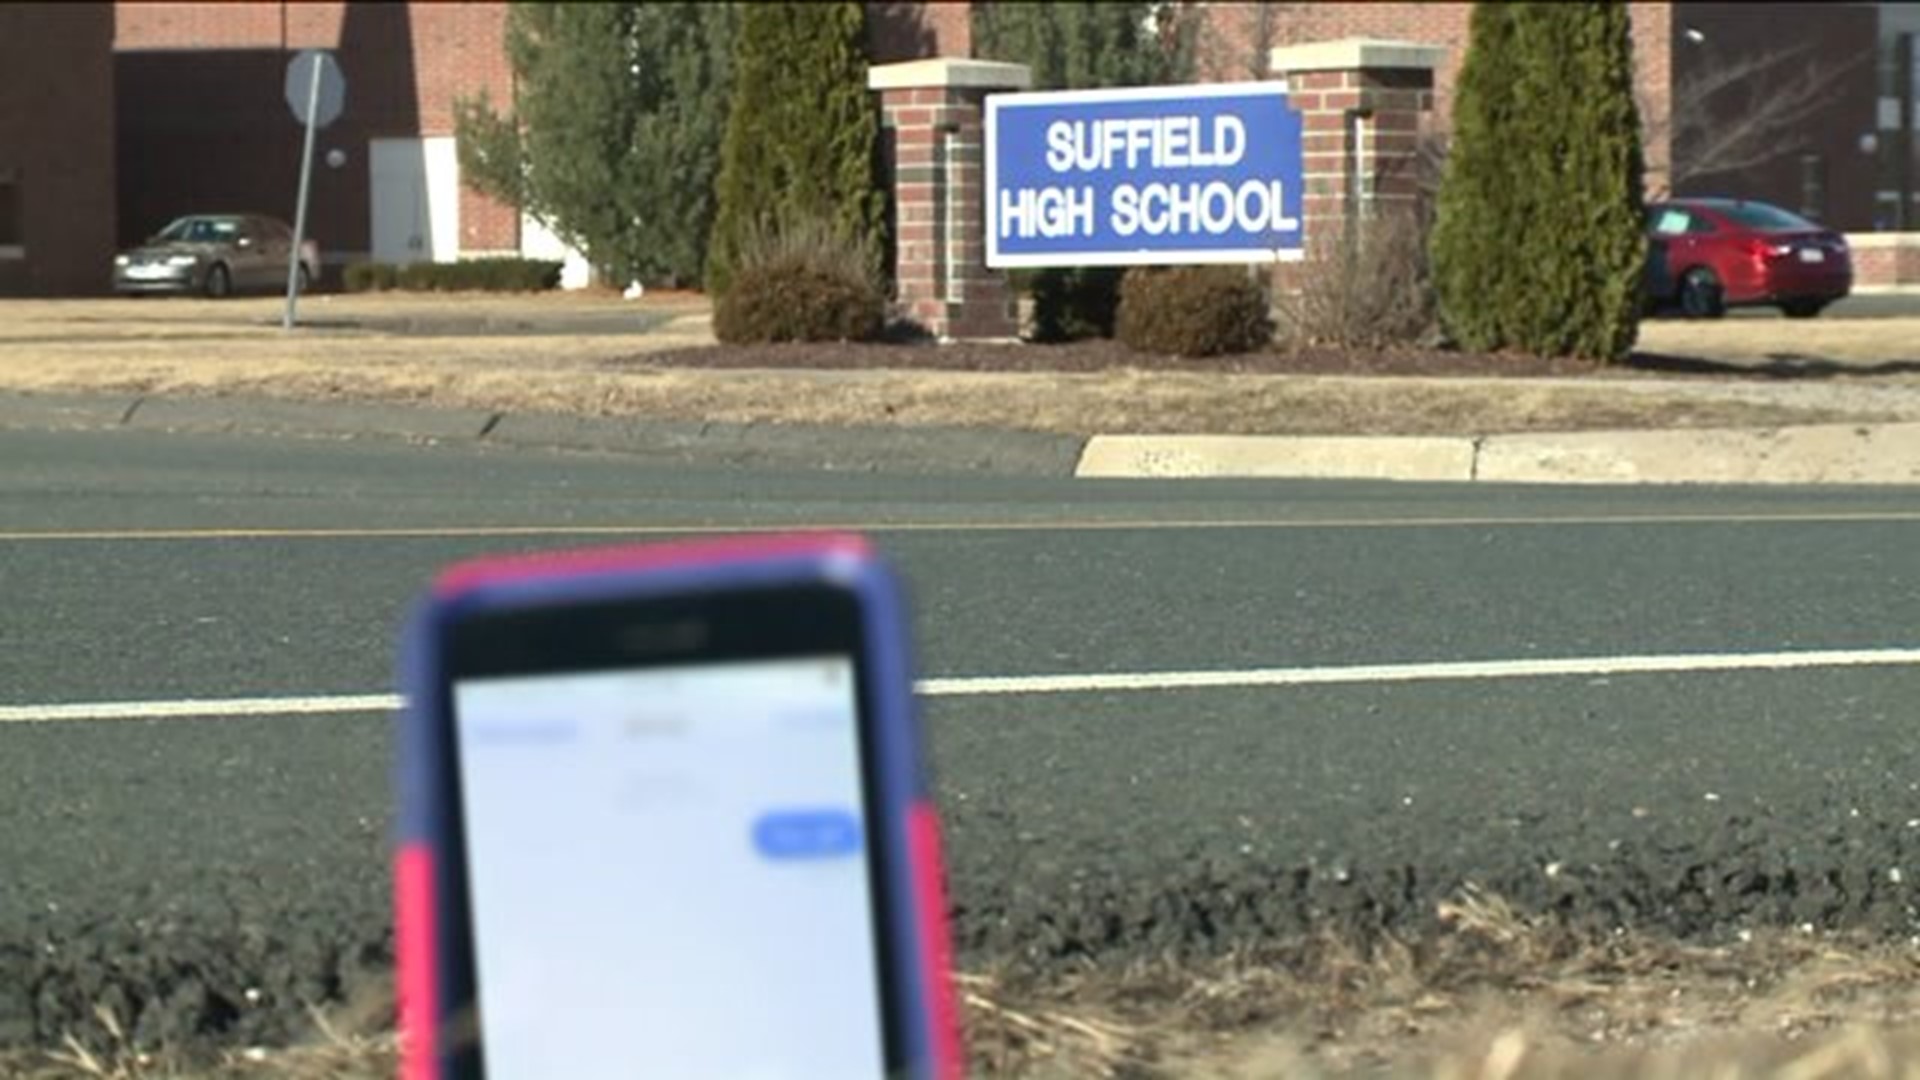 Suffield schools holding workshop on Internet safety after texting issue